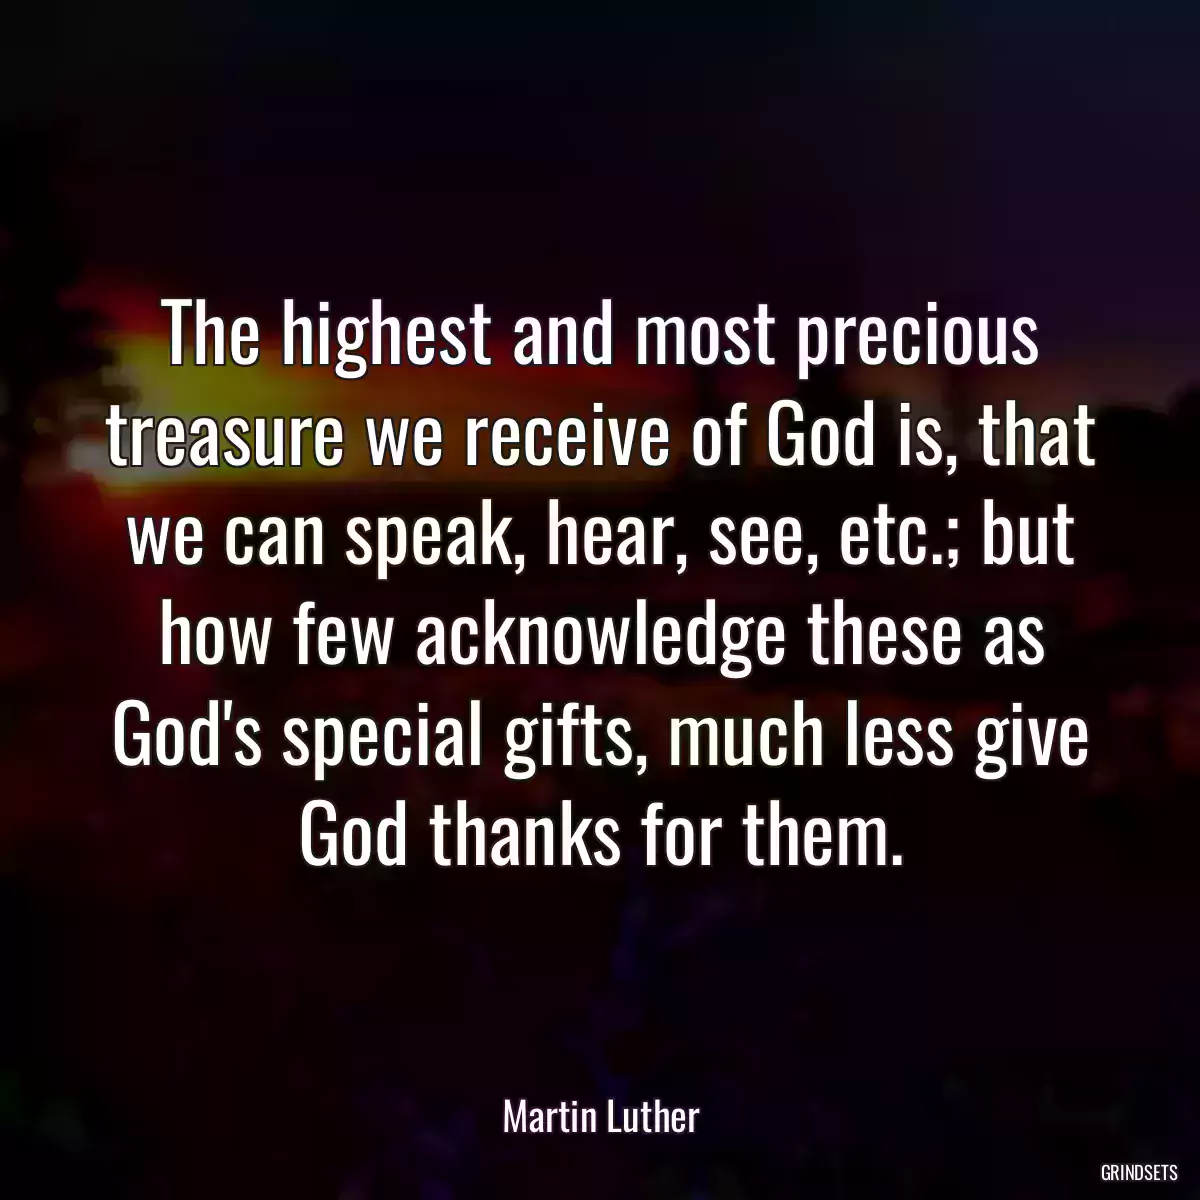 The highest and most precious treasure we receive of God is, that we can speak, hear, see, etc.; but how few acknowledge these as God\'s special gifts, much less give God thanks for them.